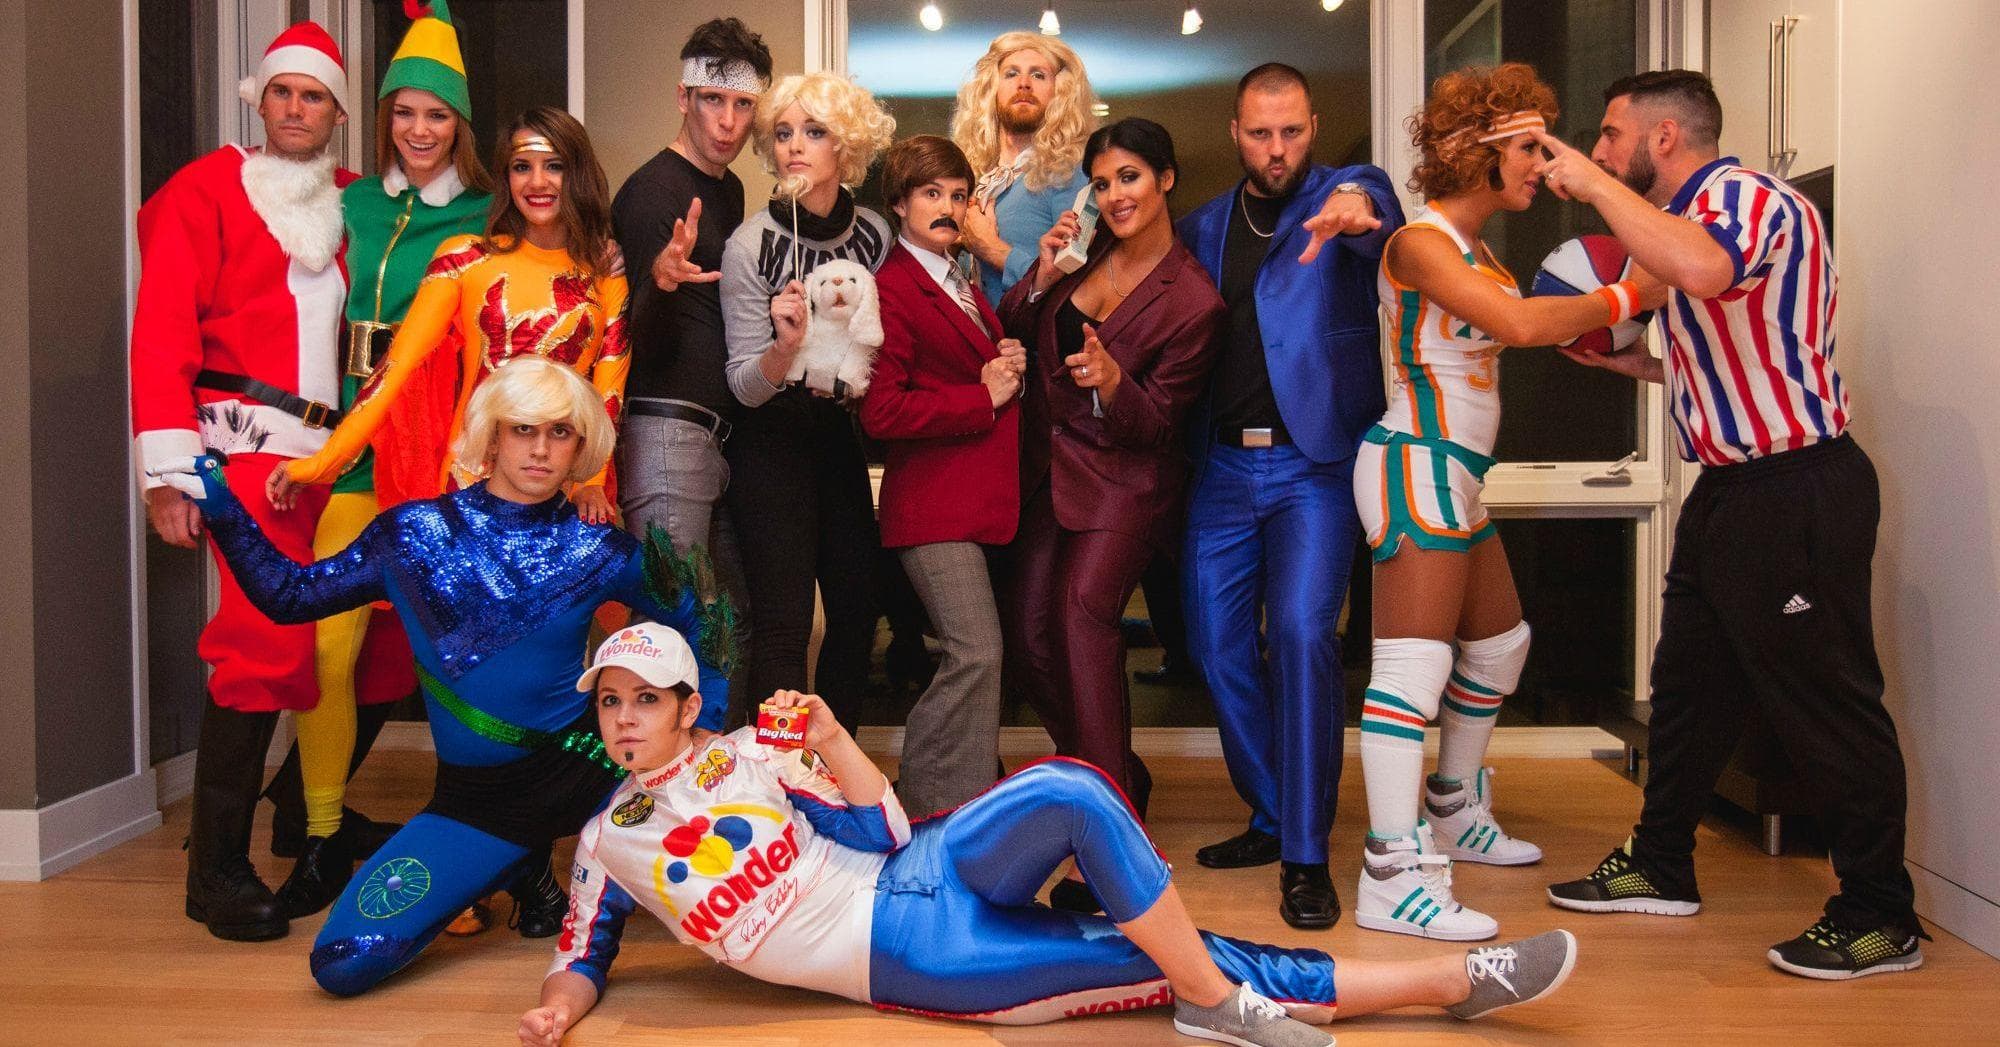 The Best Group Halloween Costumes, Ranked